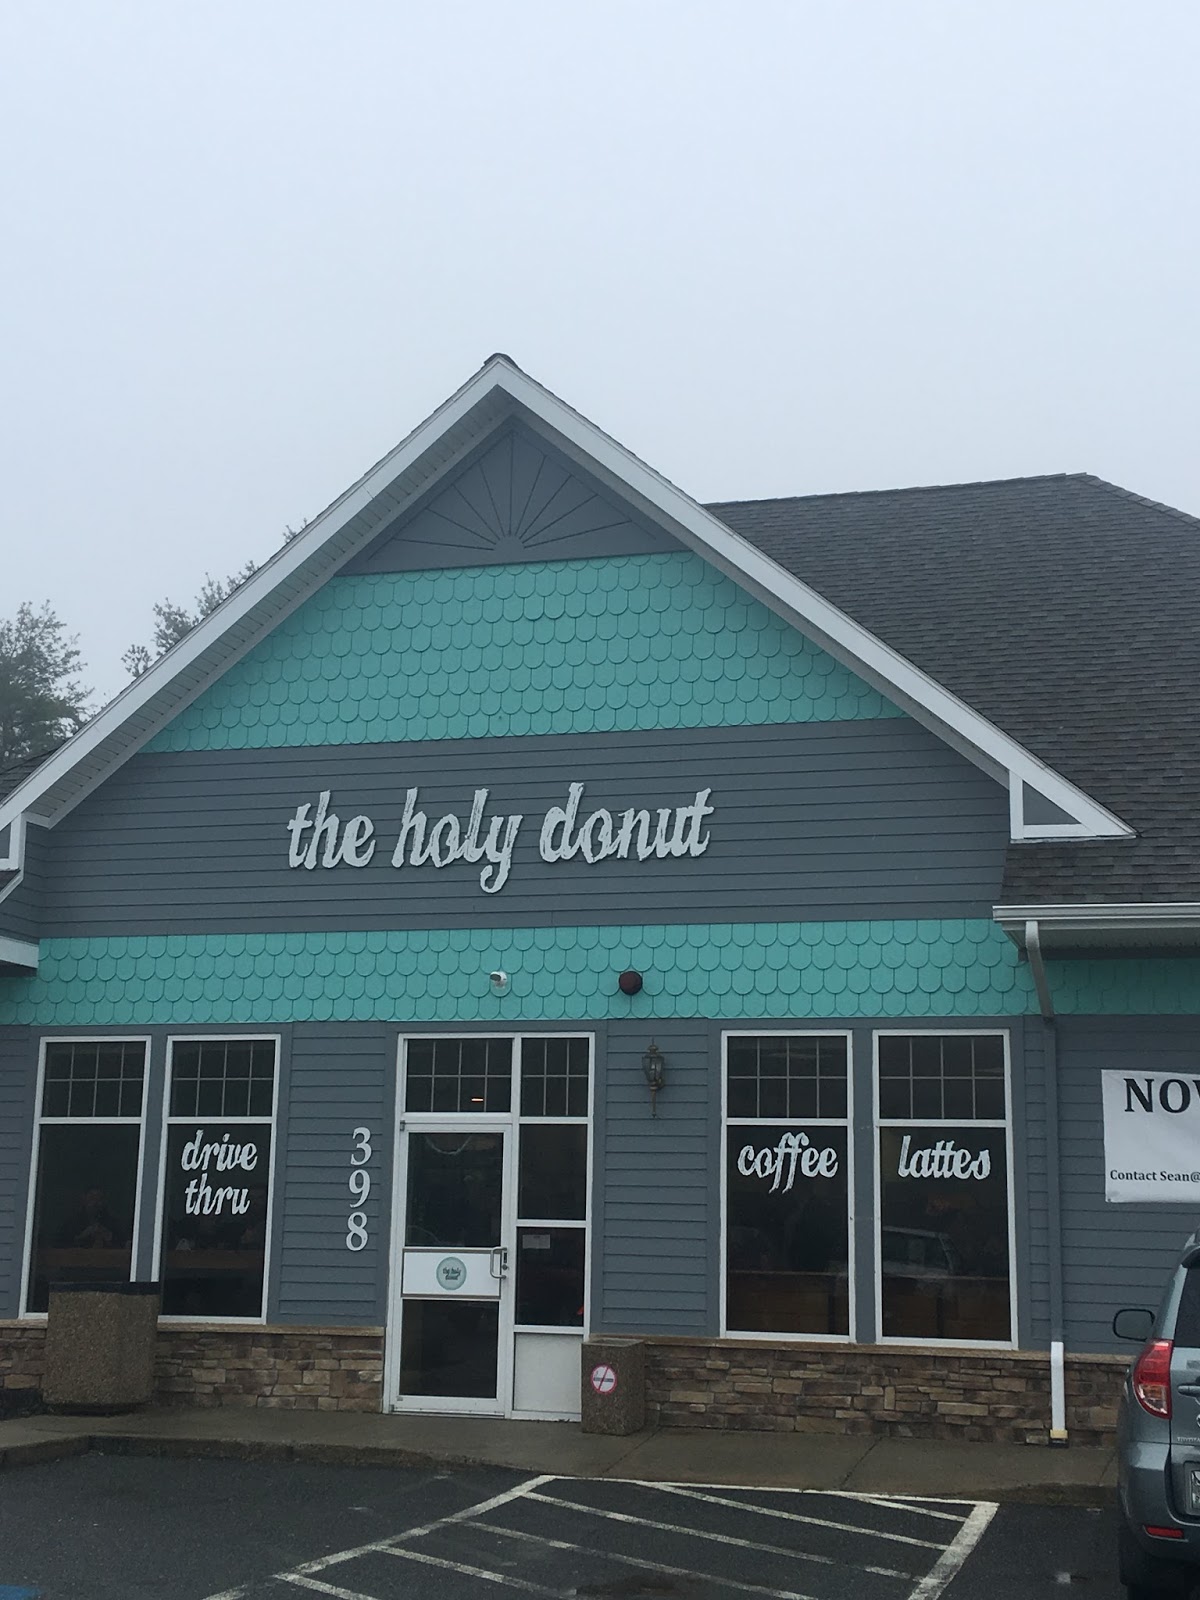 places to eat in portland, where to eat in maine, best donuts to eat, potato donut